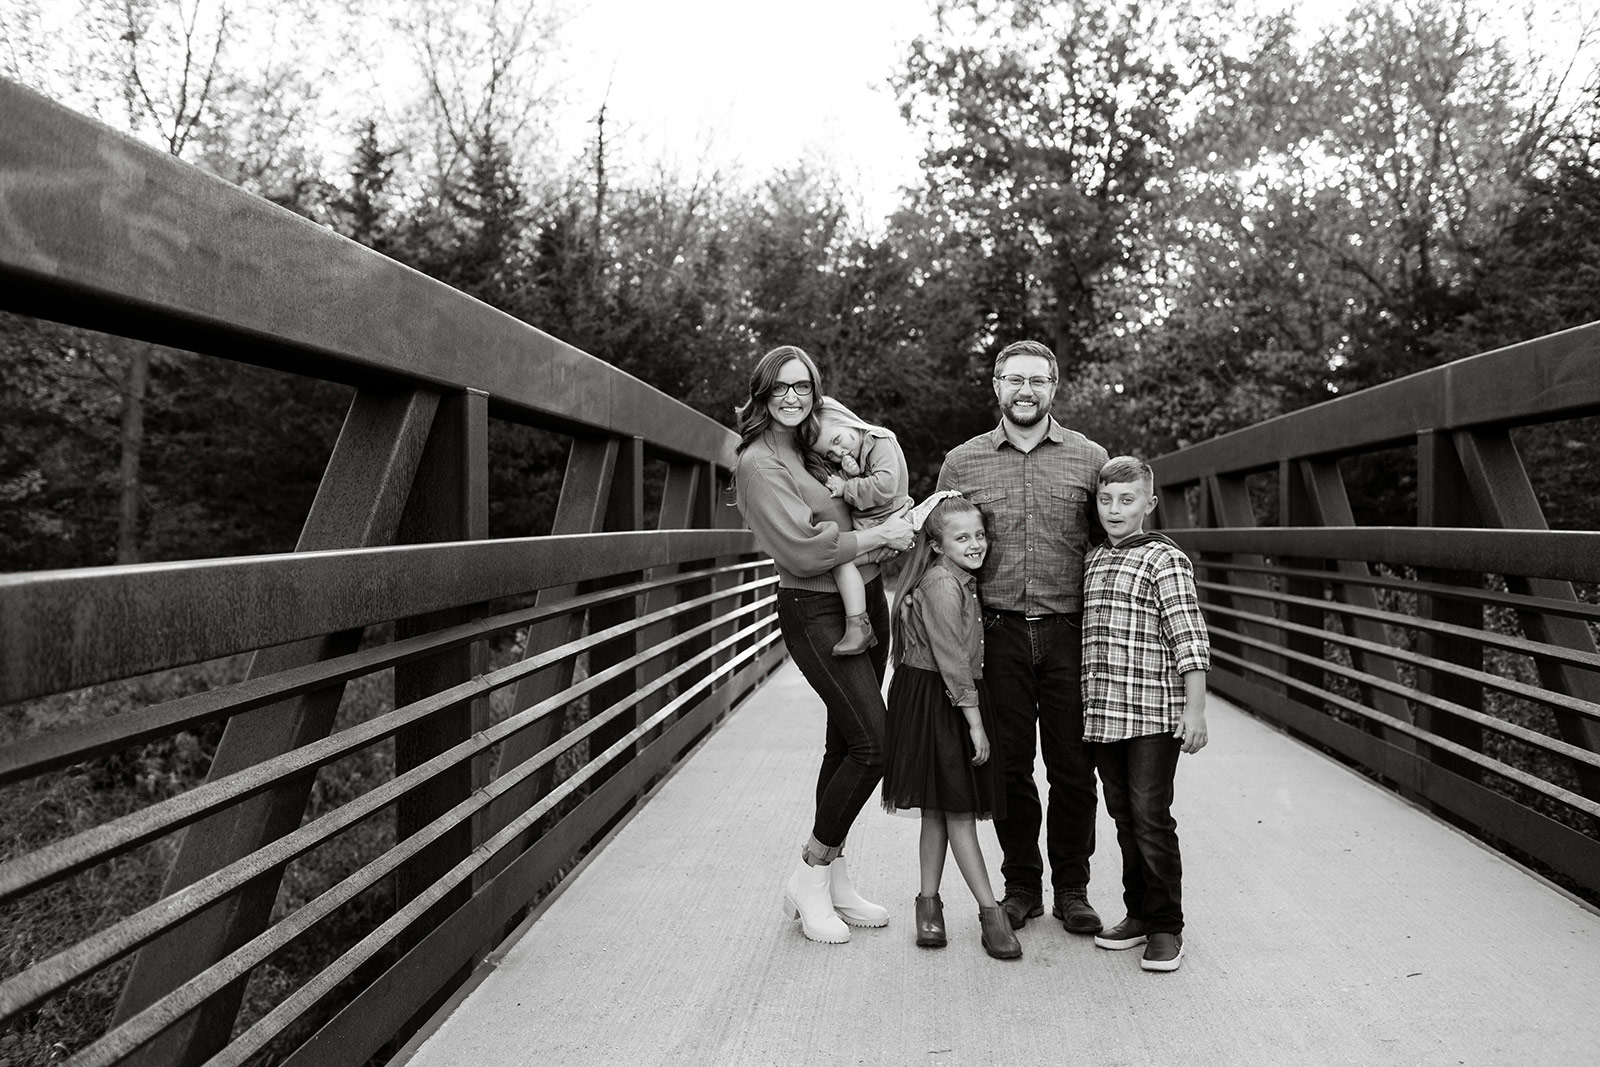 The whole family stands close together on a bridge.